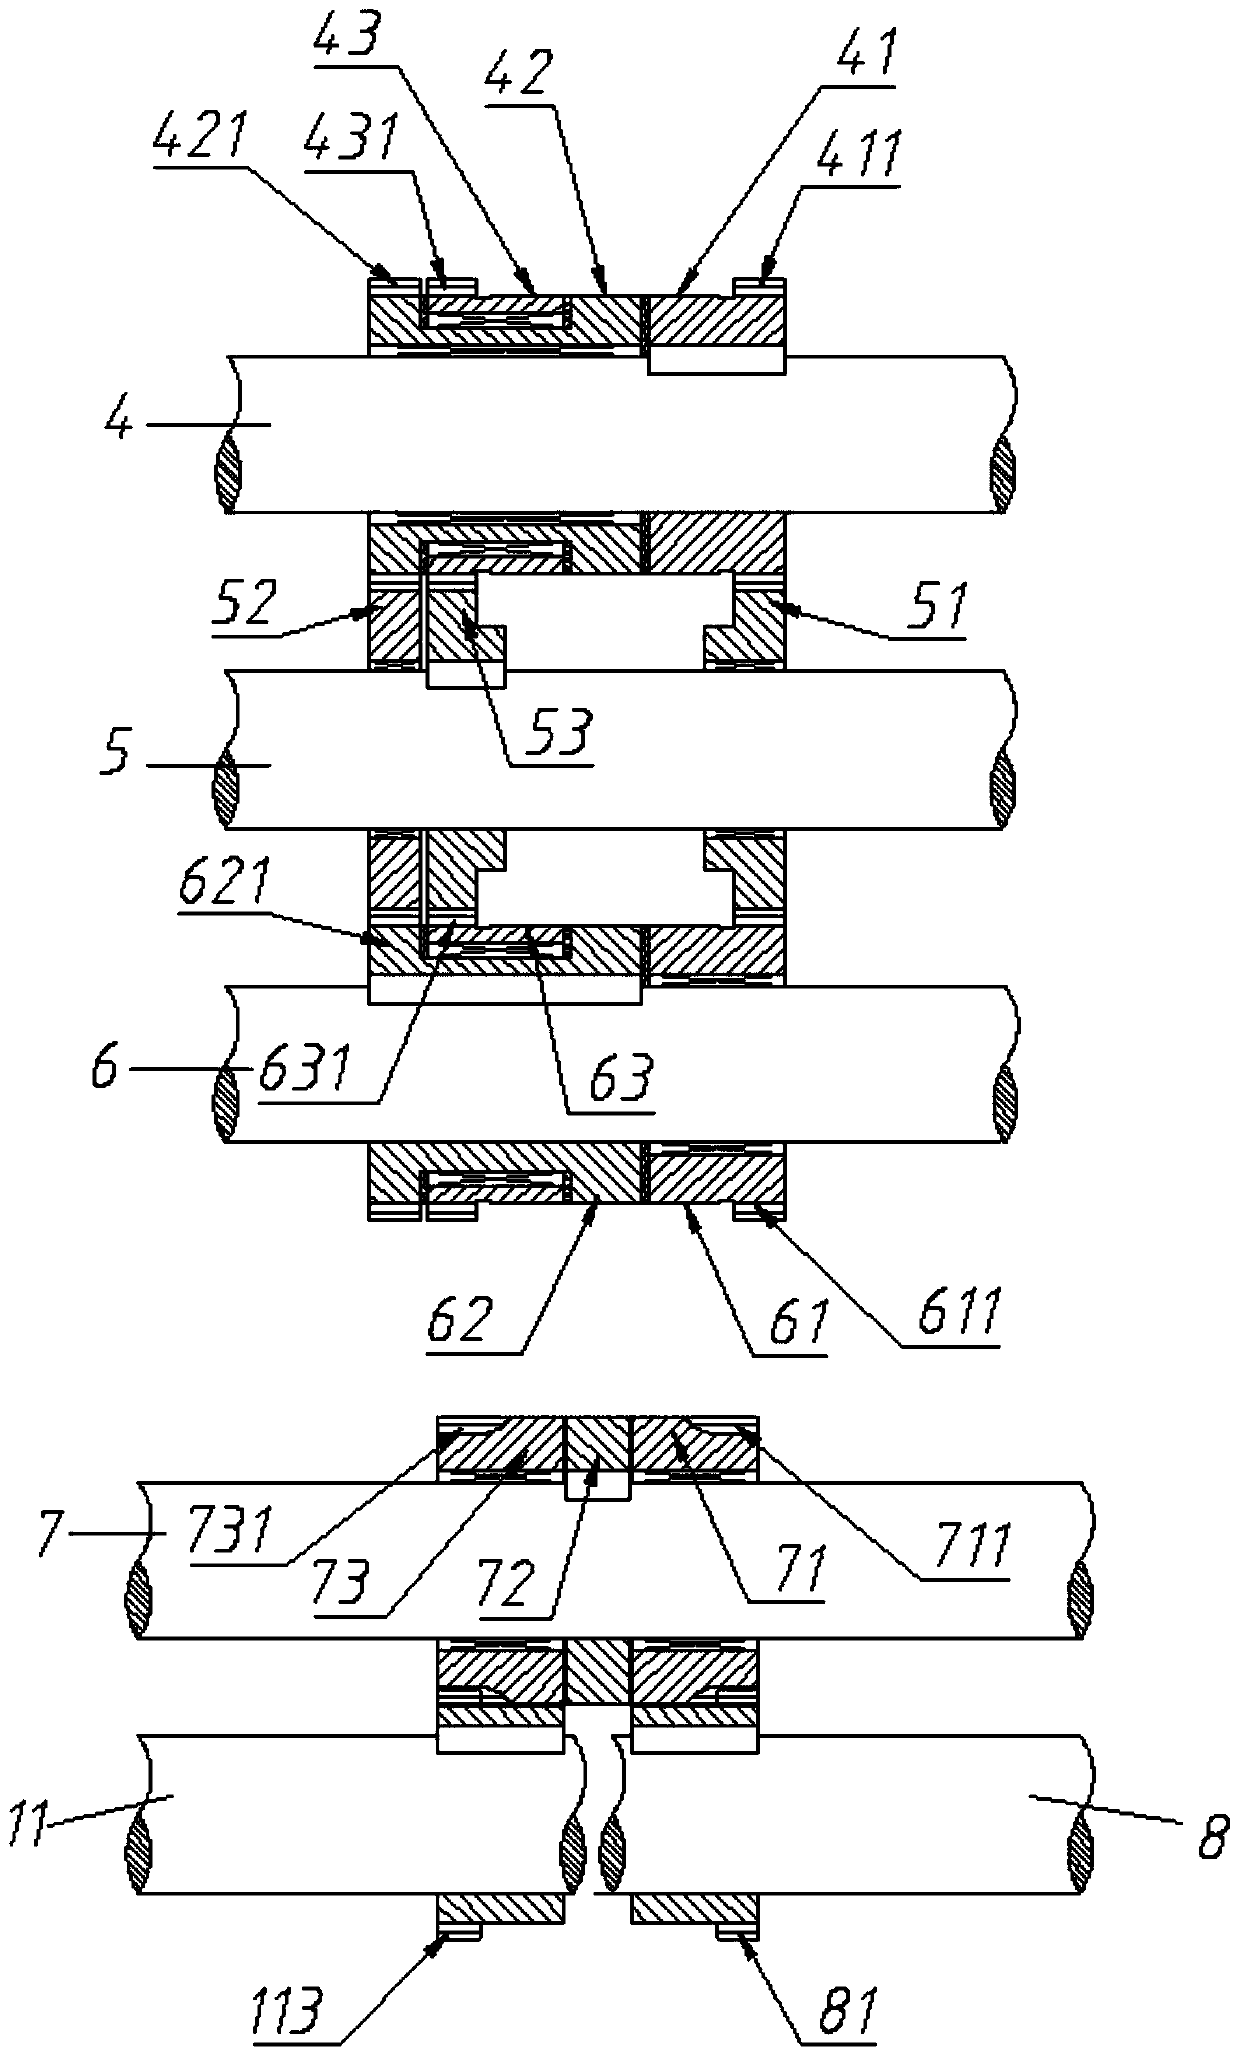 Four-channel hollow ingot fancy yarn forming device and method